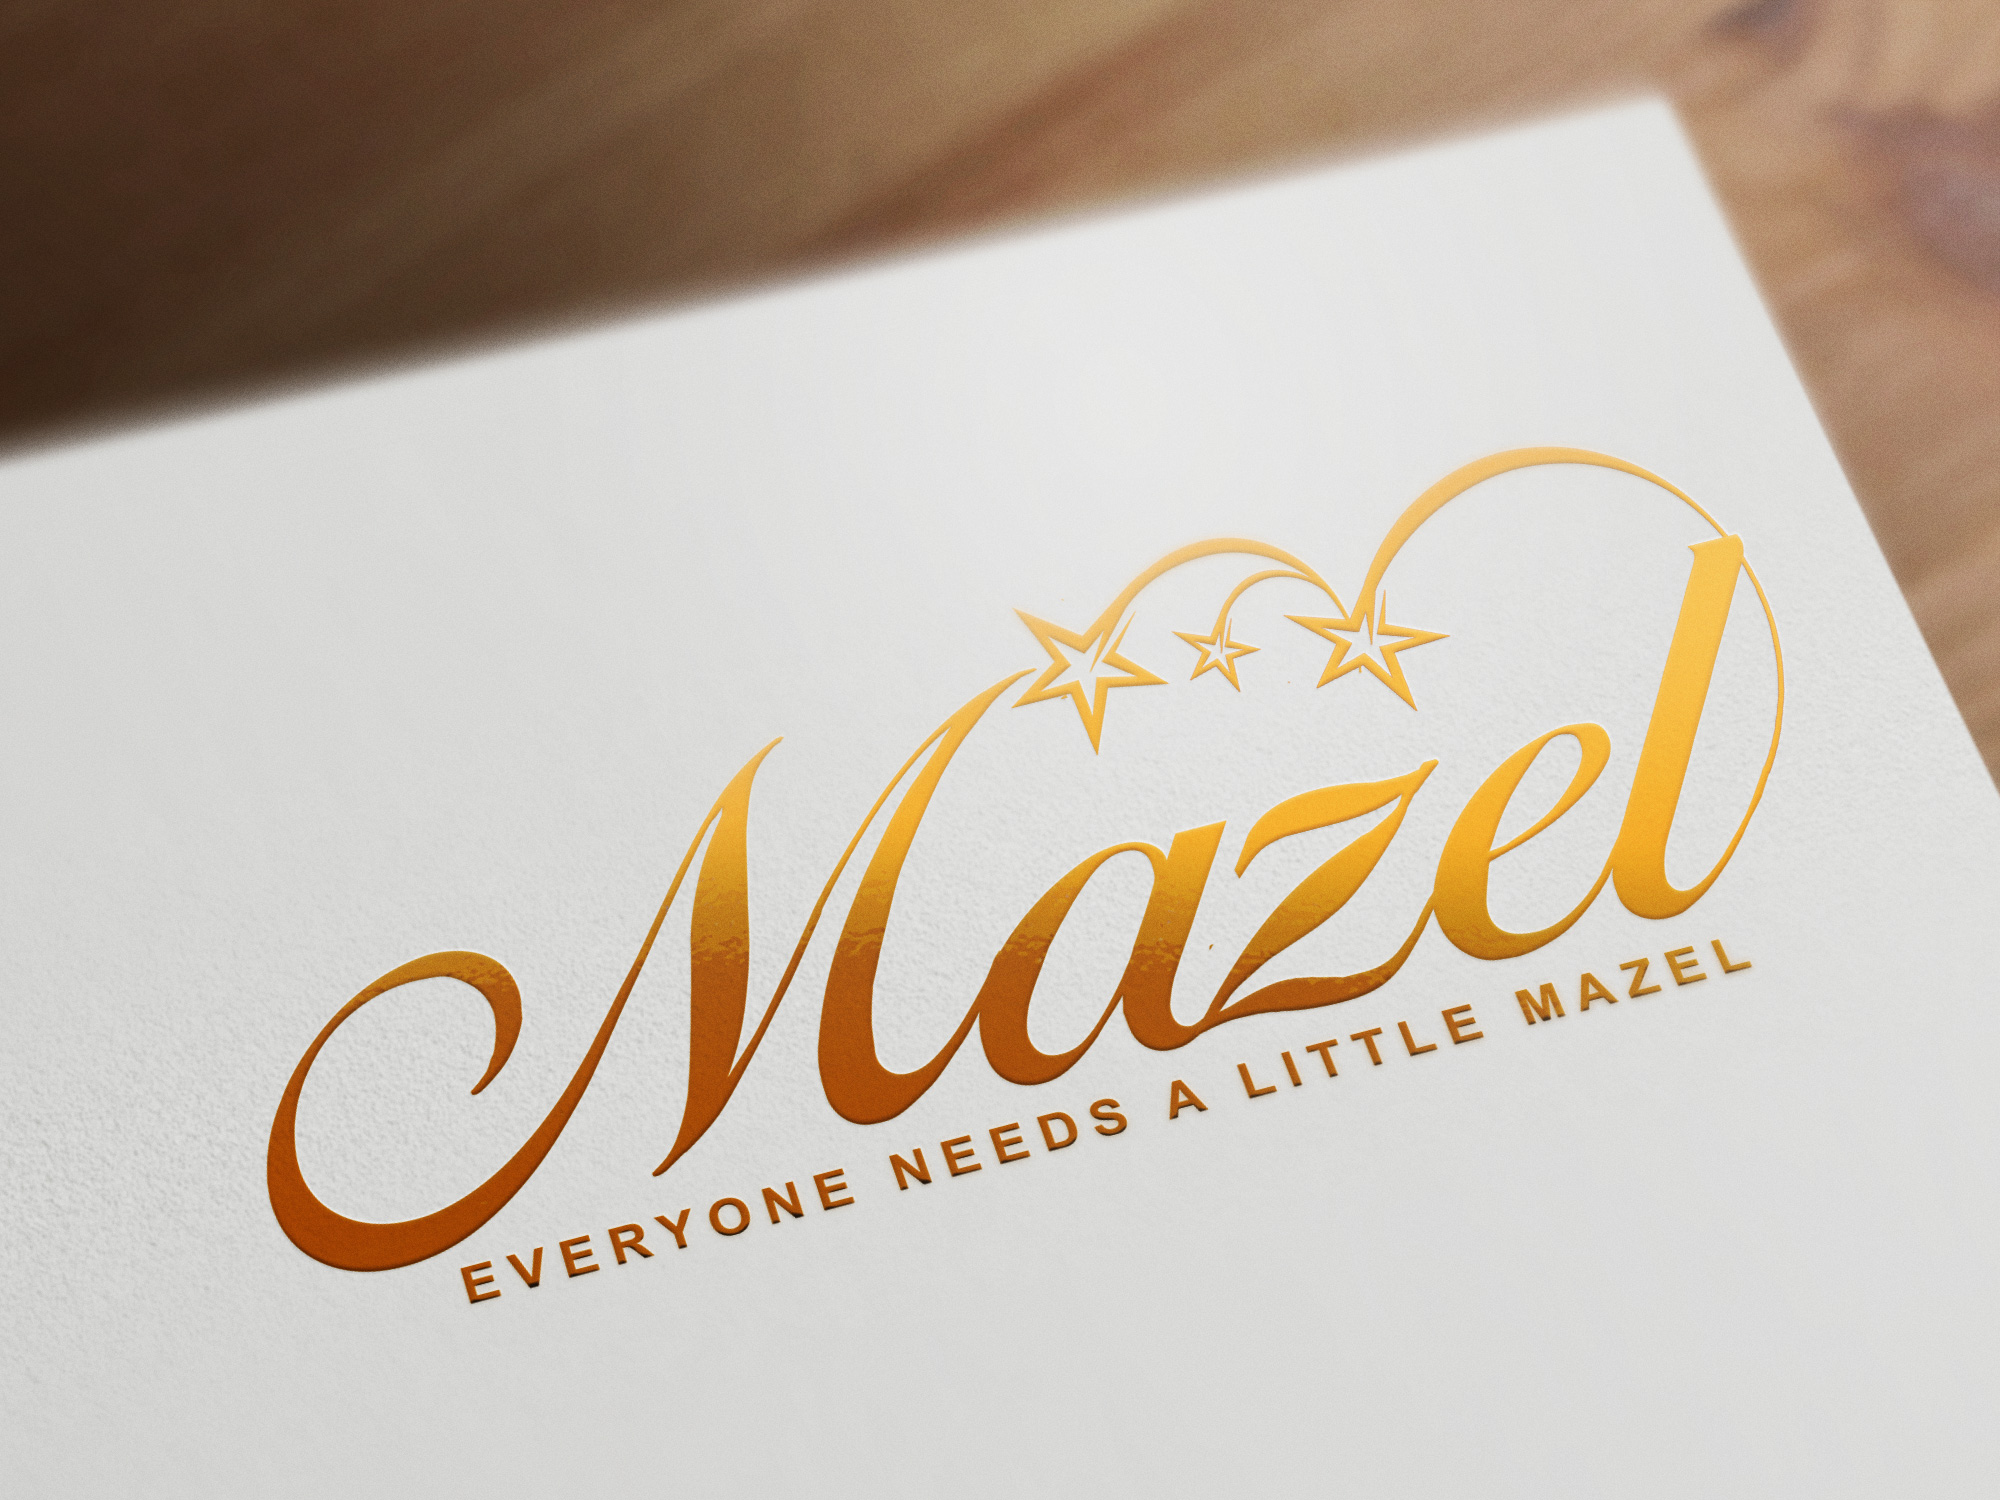 Cause Mazel Means Good Luck